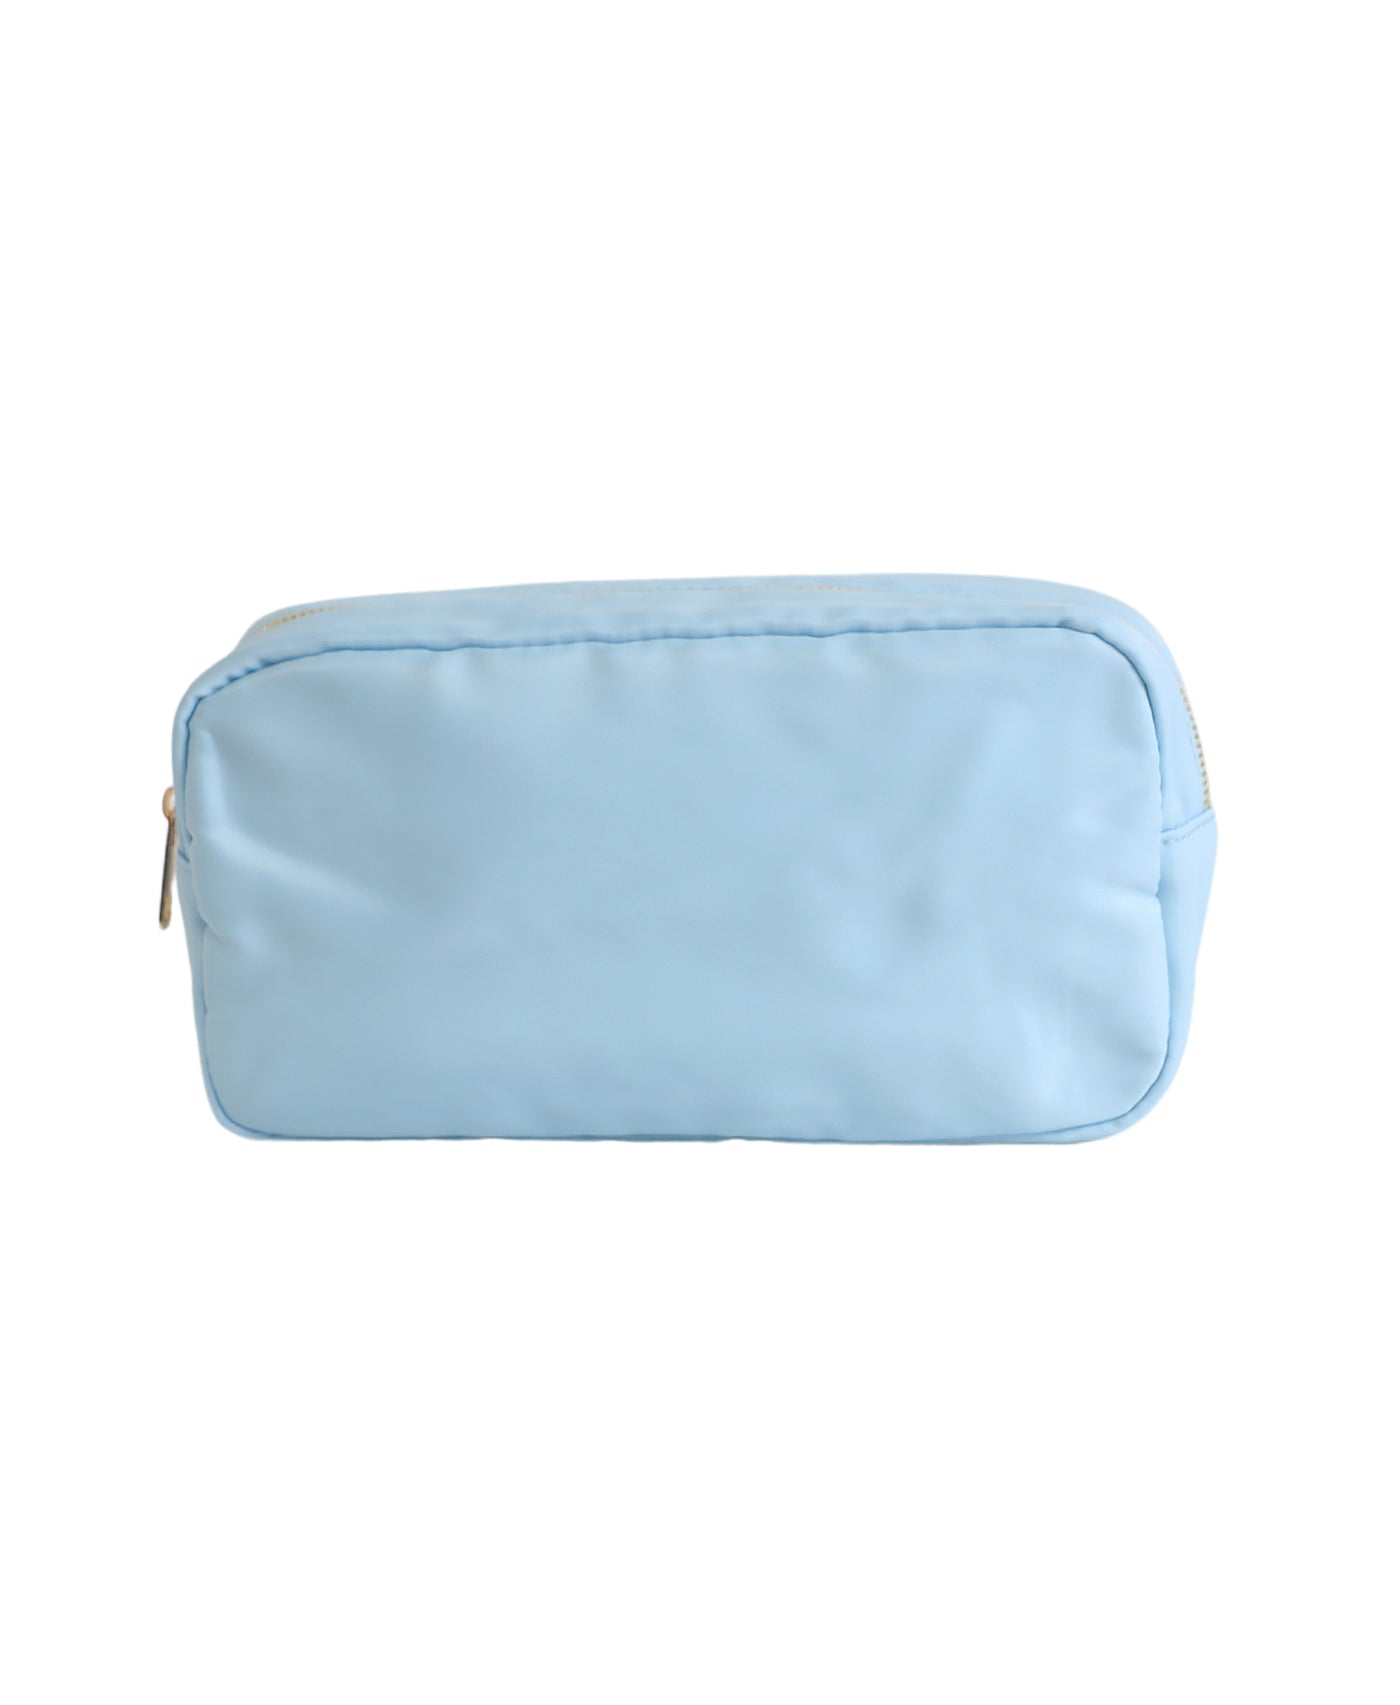 Sky Large Pouch image 1